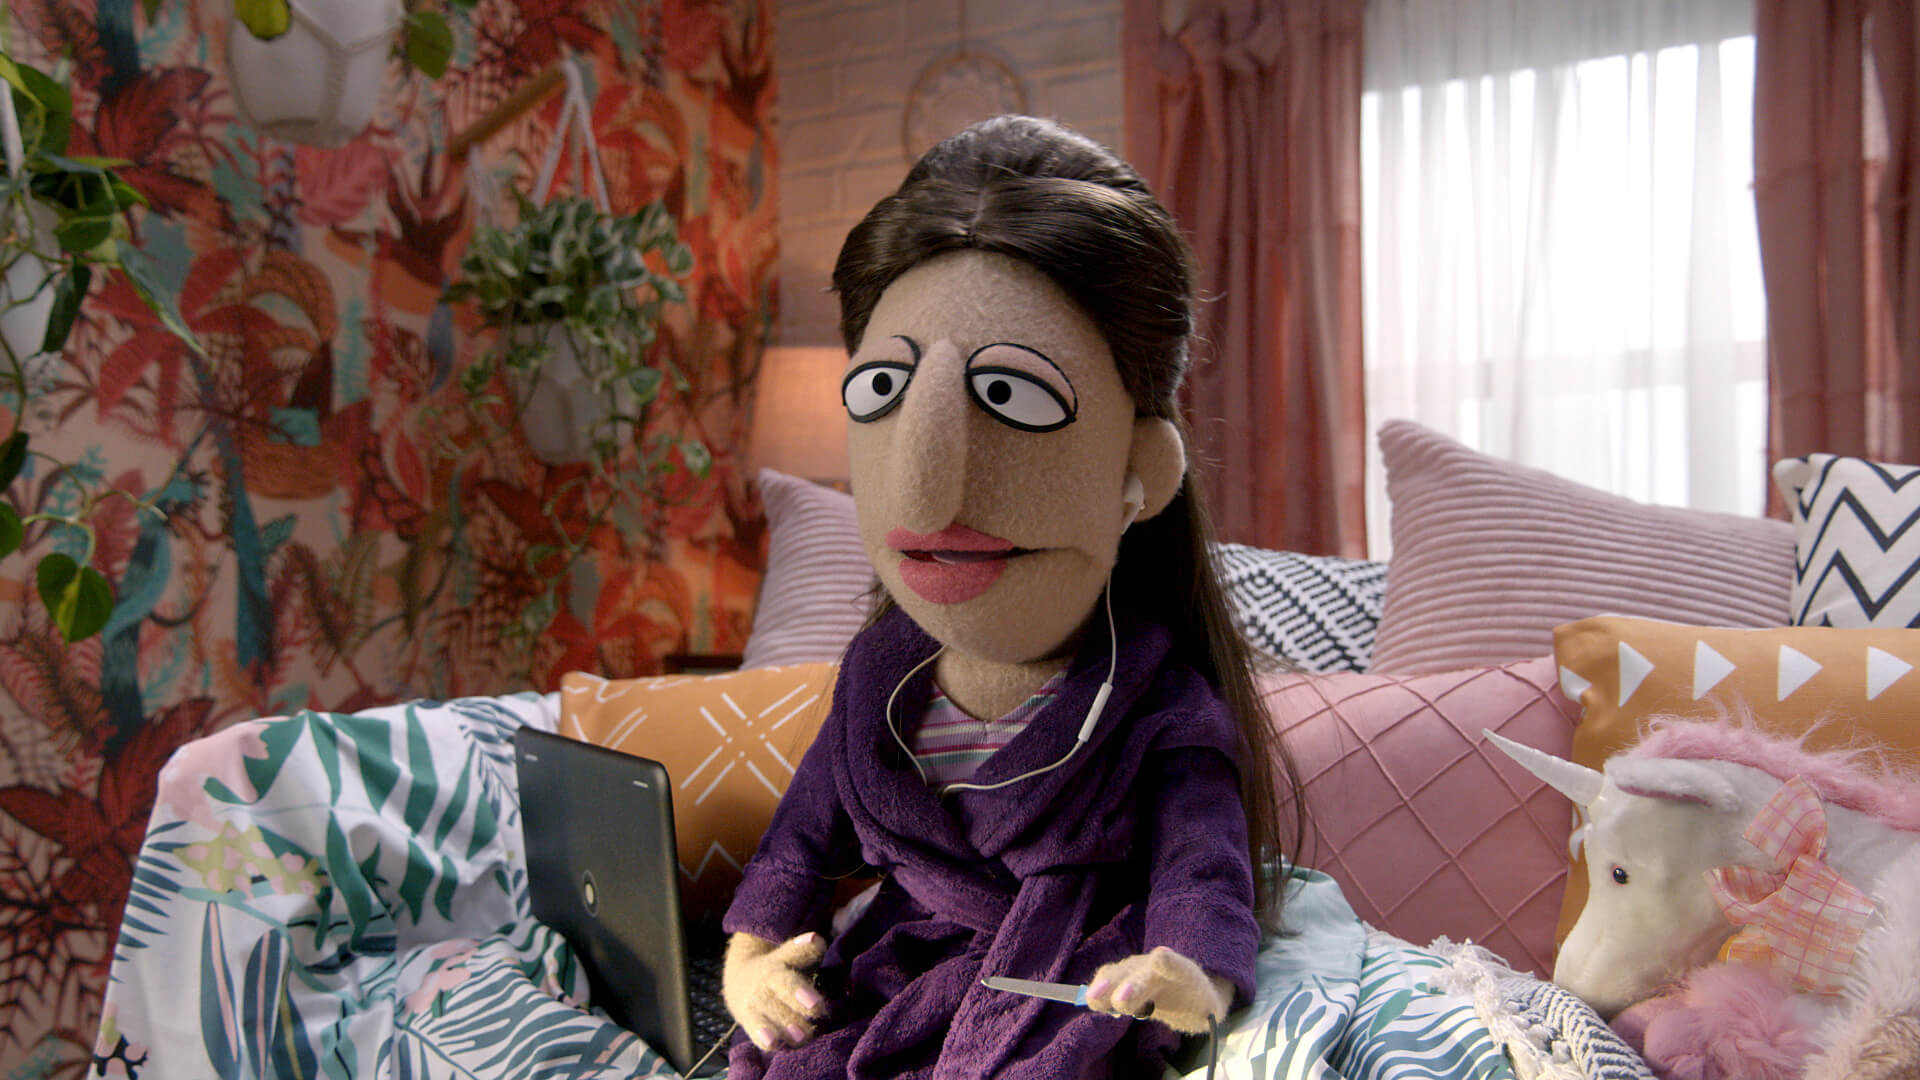 Sarah Silverman as a puppet on Comedy Central's Crank Yankers